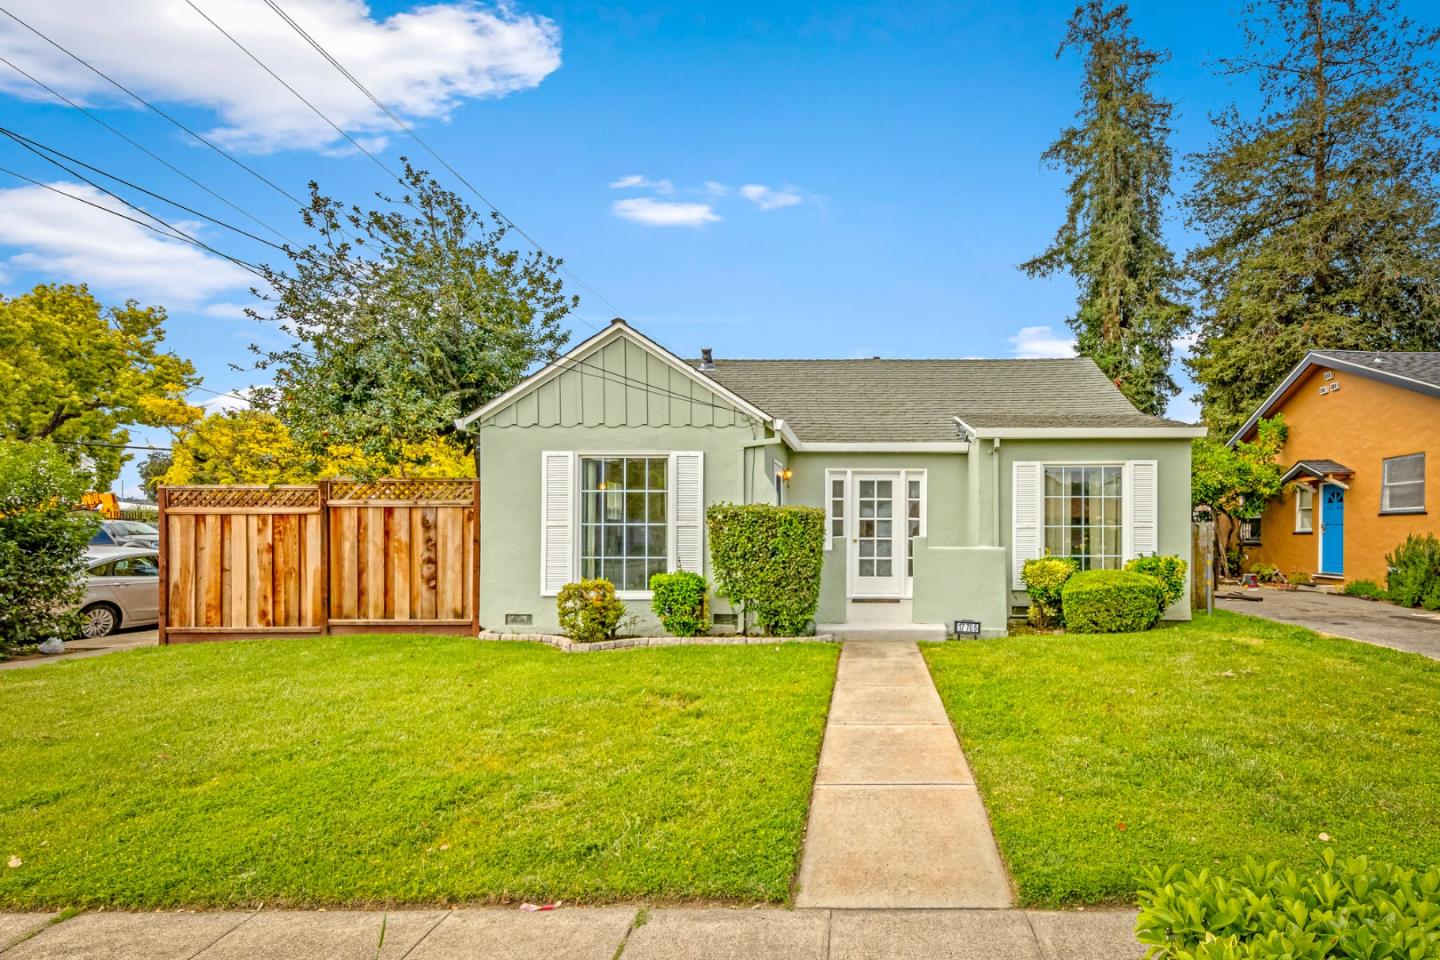 Photo of 17705 Park Wy in Morgan Hill, CA